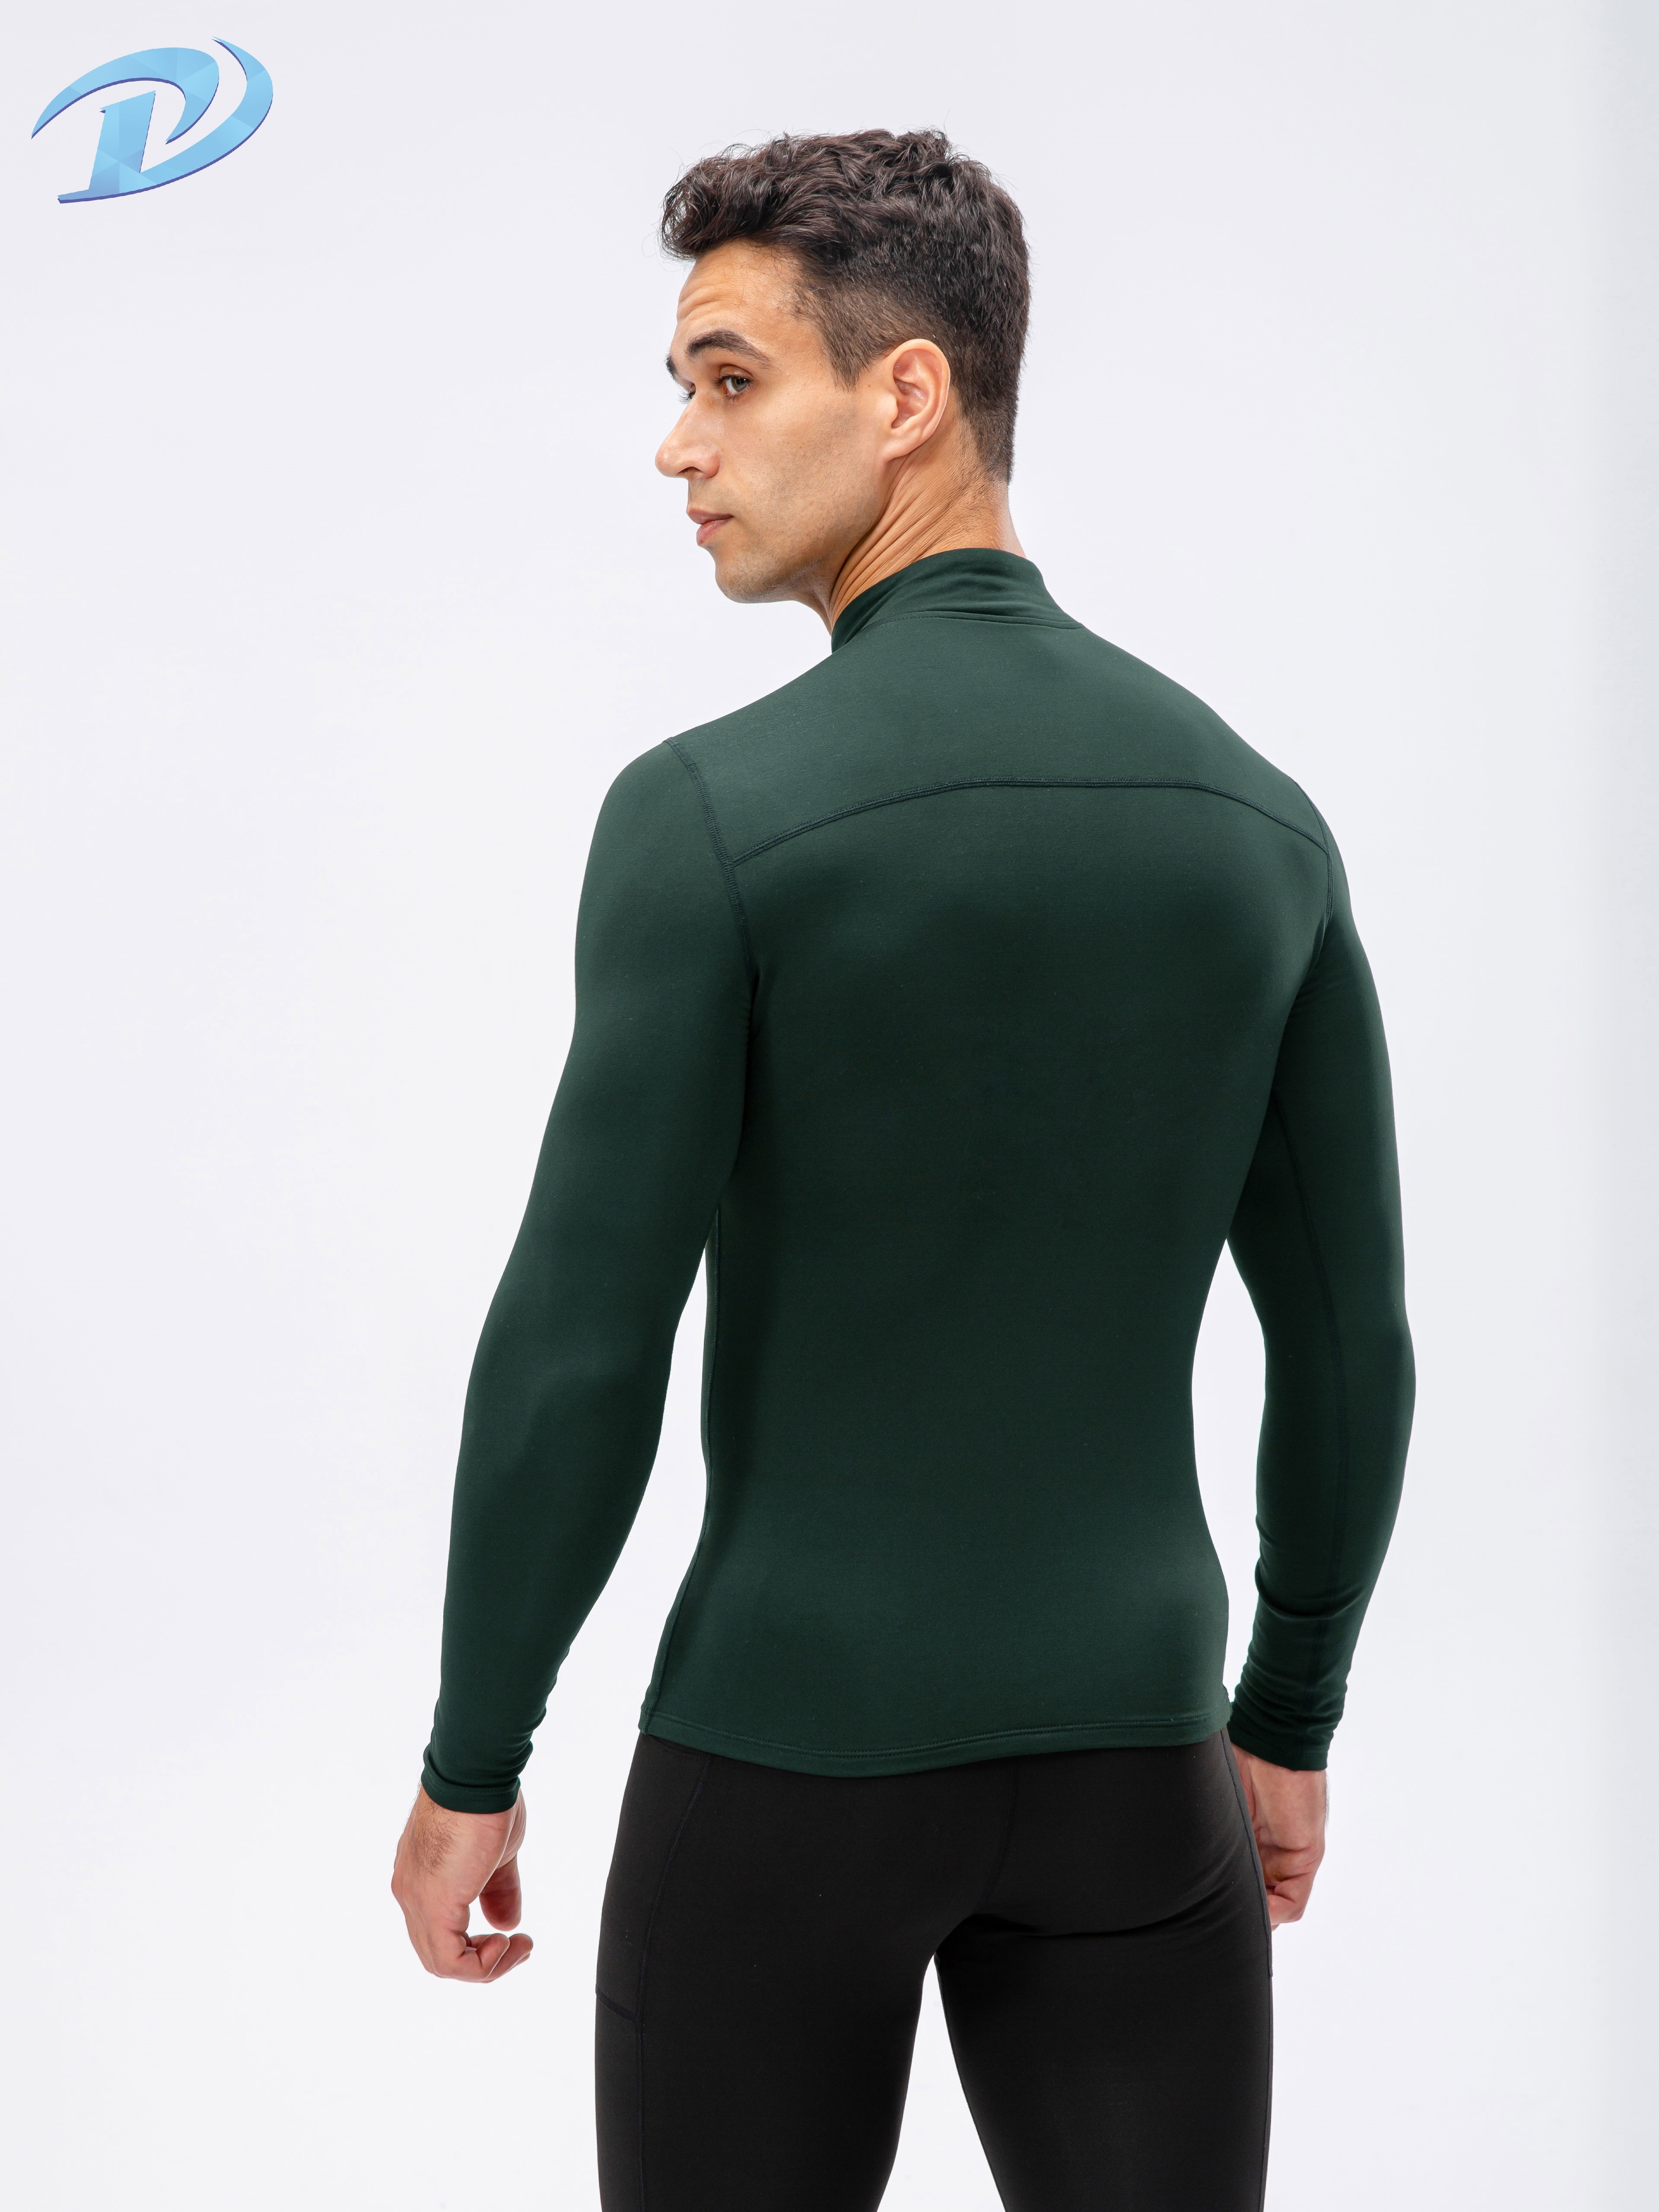 Clearance Sales Today Deals Prime,TOFOTL Spring And Autumn Men's Standing  Collar Sweatshirt Is Outdoor Casual Sweaters Tops